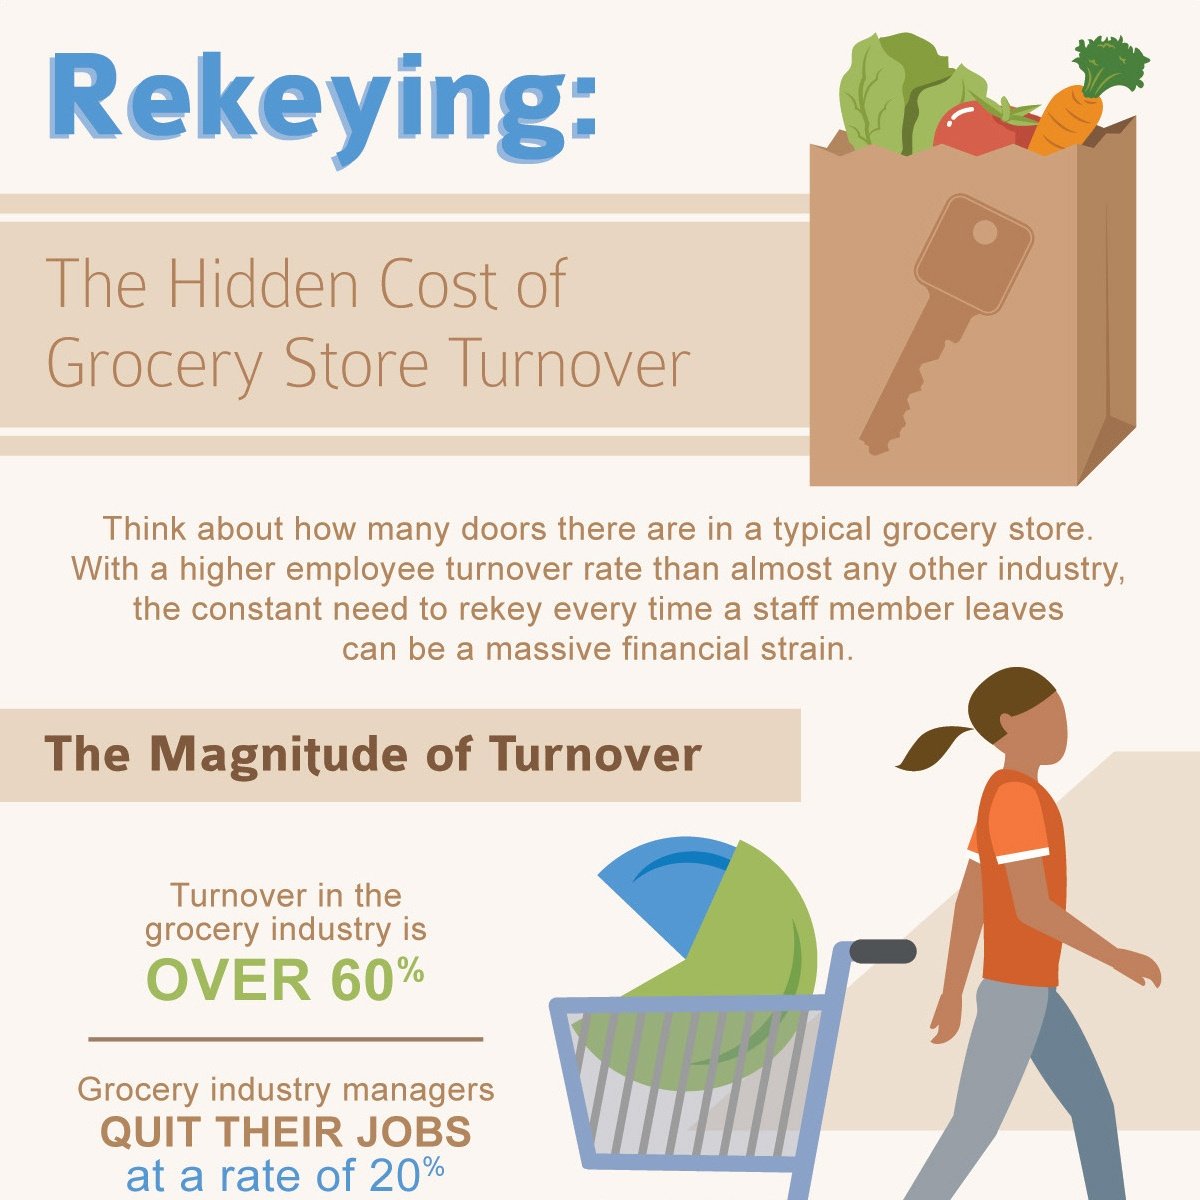 Rekeying: The Hidden Cost of Grocery Store Turnover